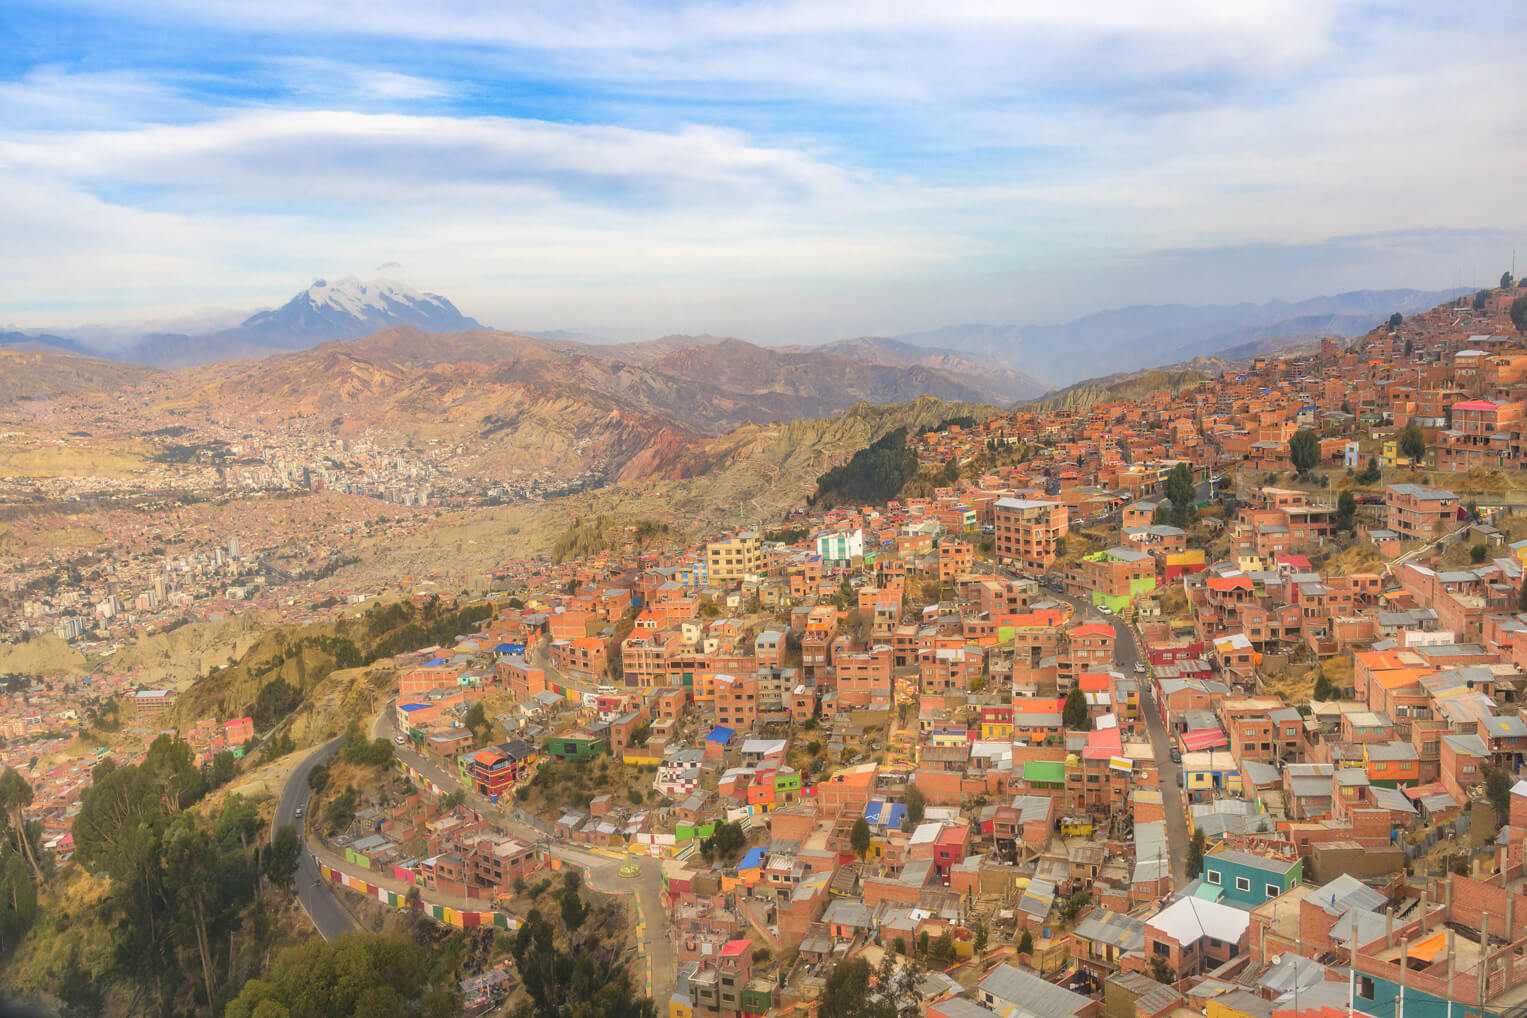 The city of El Alto overlooks the larger La Paz and the high altitude Andean peaks.